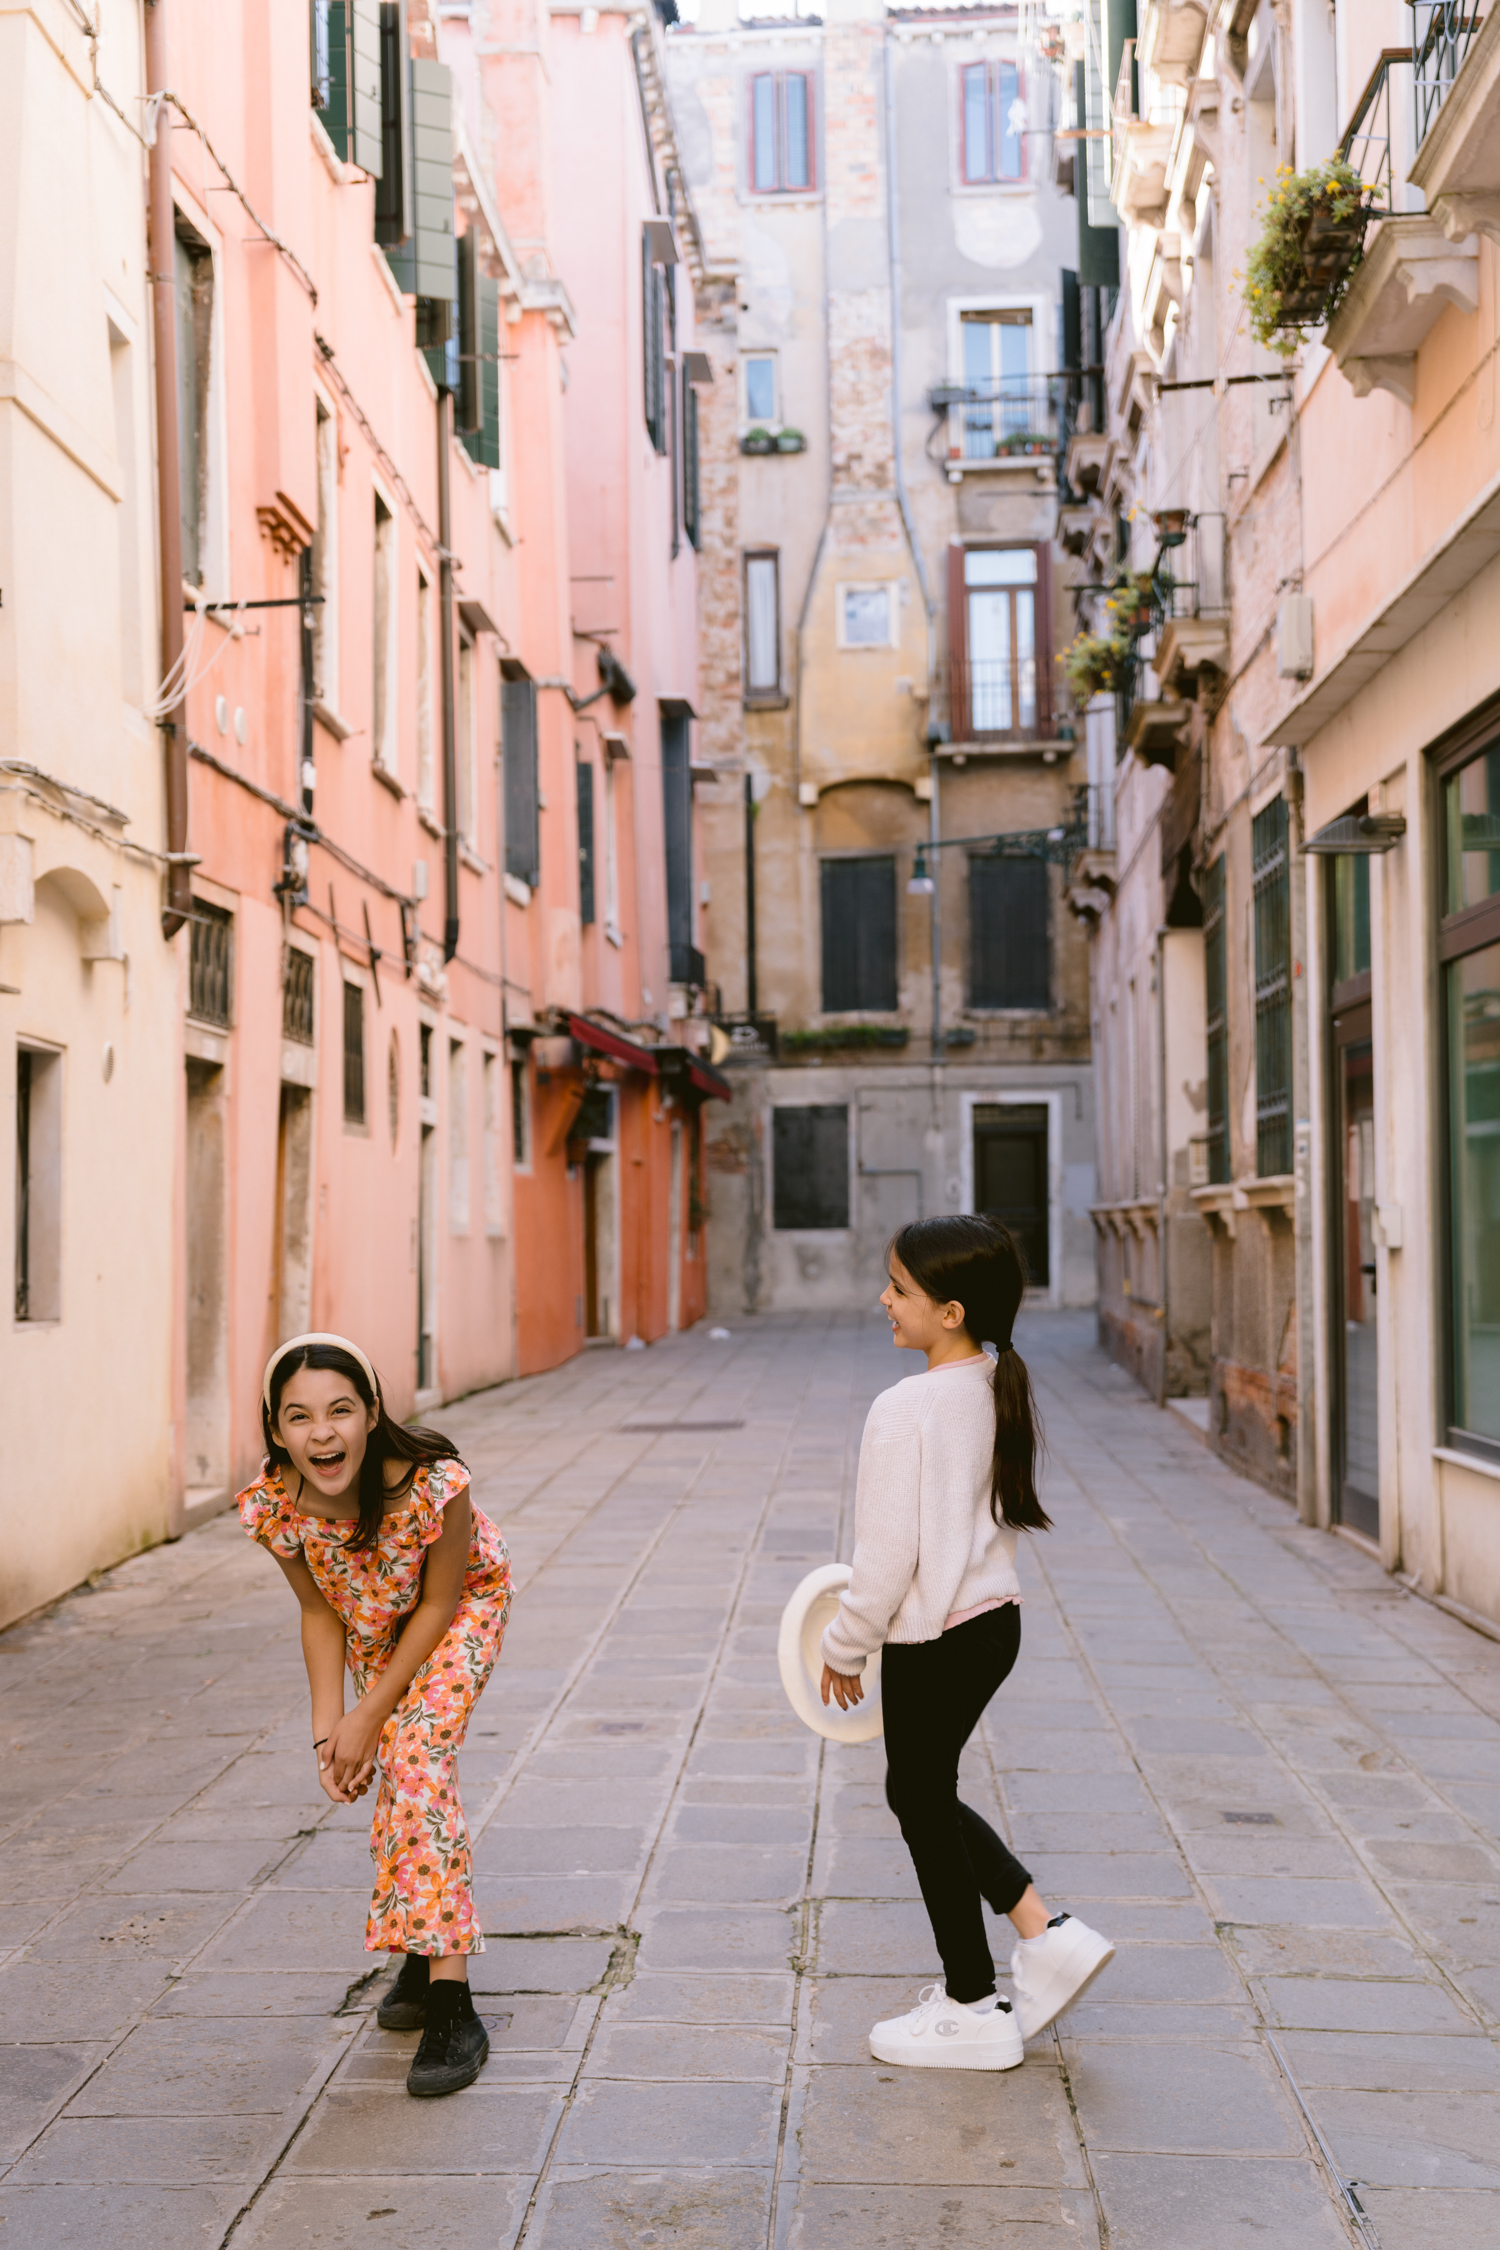 How to make your family photoshoot in Venice a fun experience? Book your family photographer now